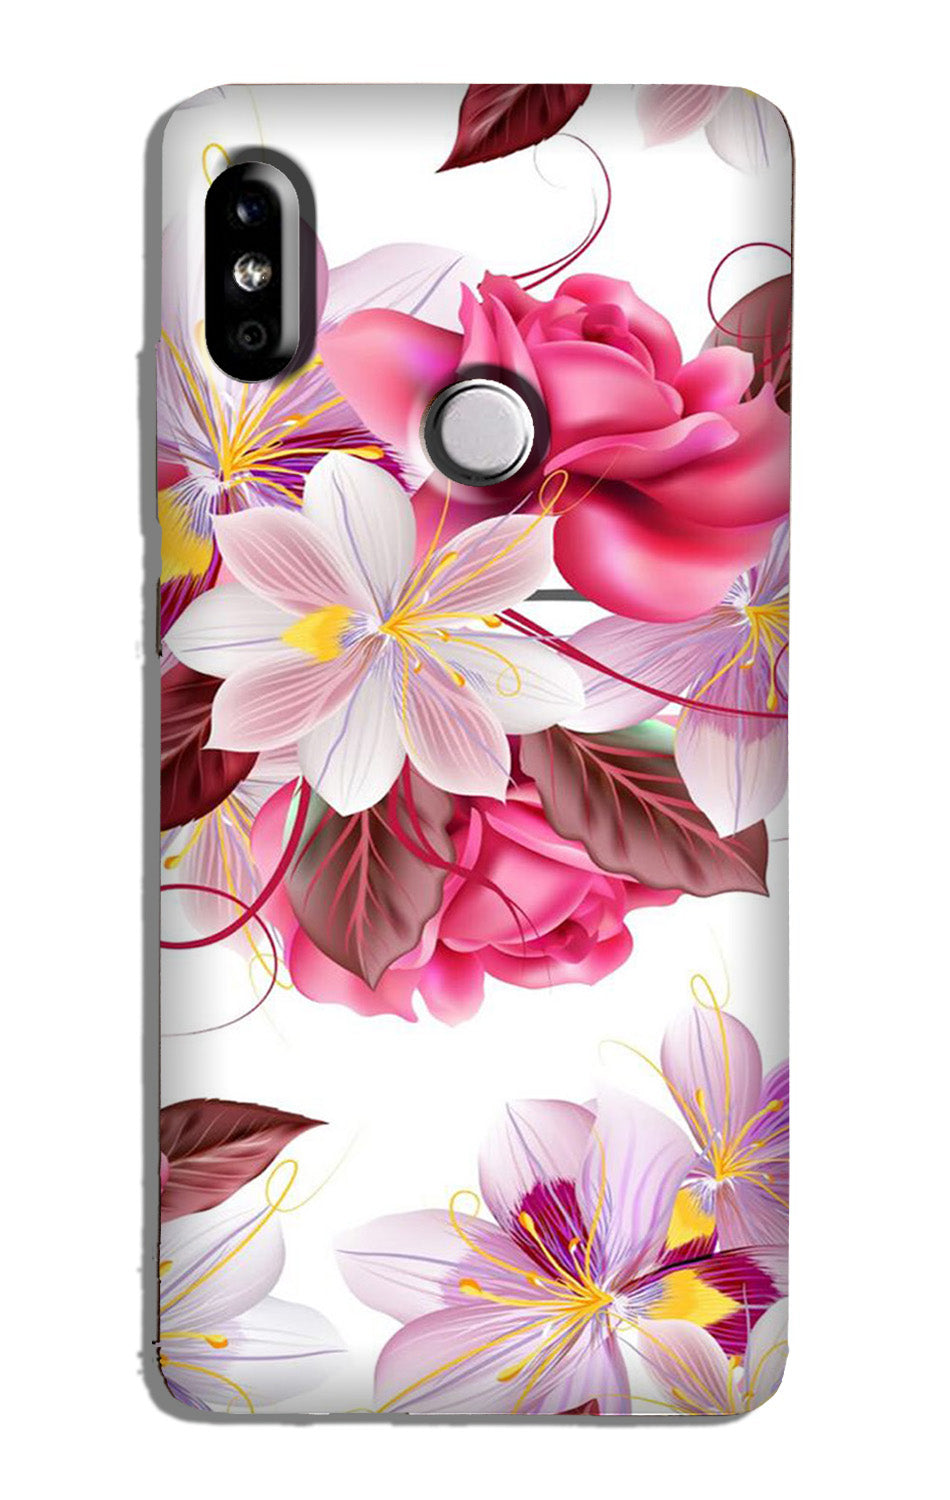 Beautiful flowers Case for Redmi Y2